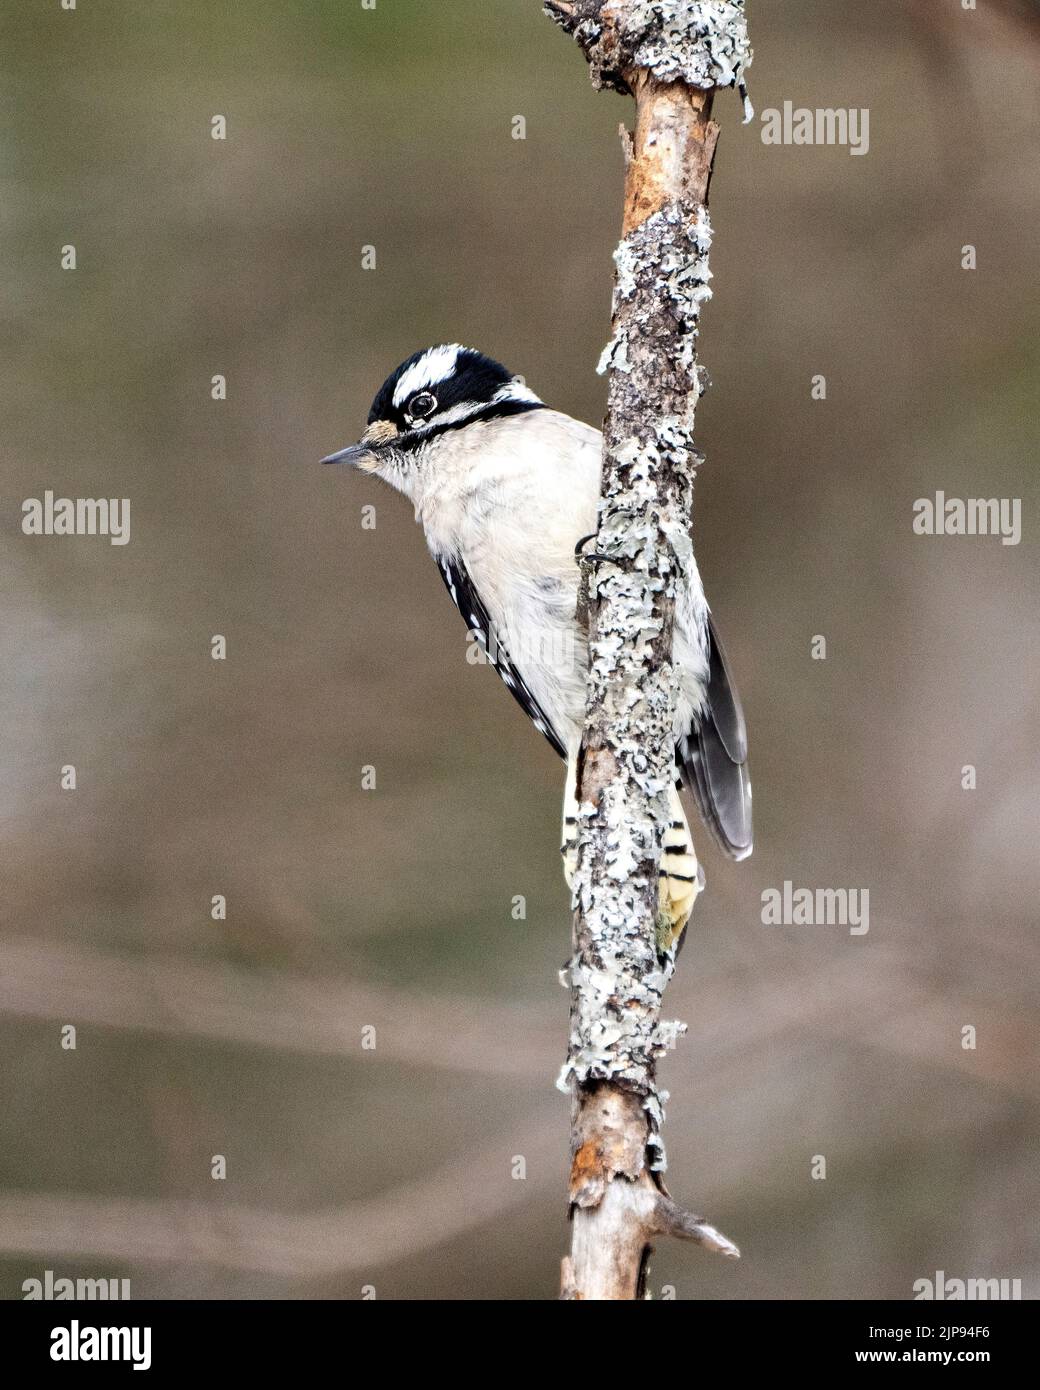 Woodpecker female on a tree trunk with a blur background in its environment and habitat surrounding displaying white and black feather plumage wings. Stock Photo